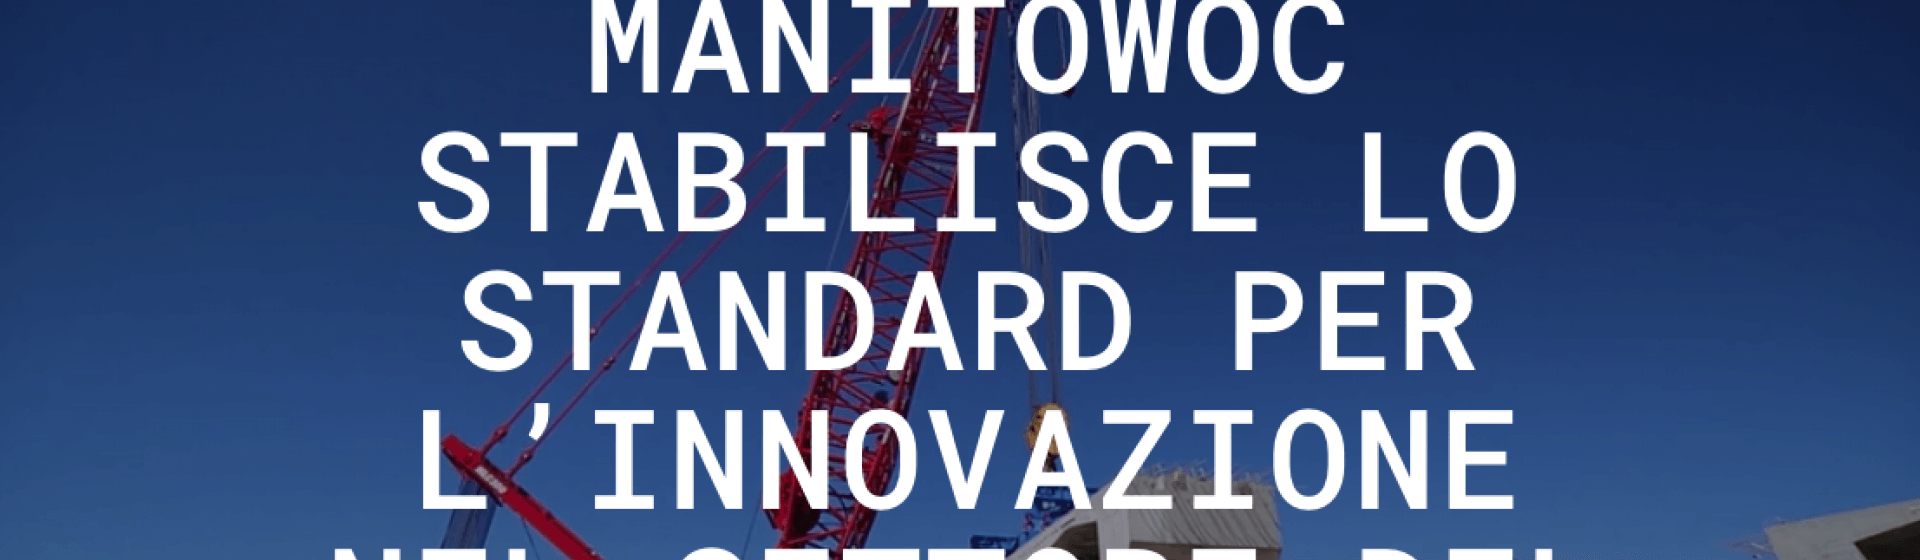 Manitowoc-launches-new-website-IT.png